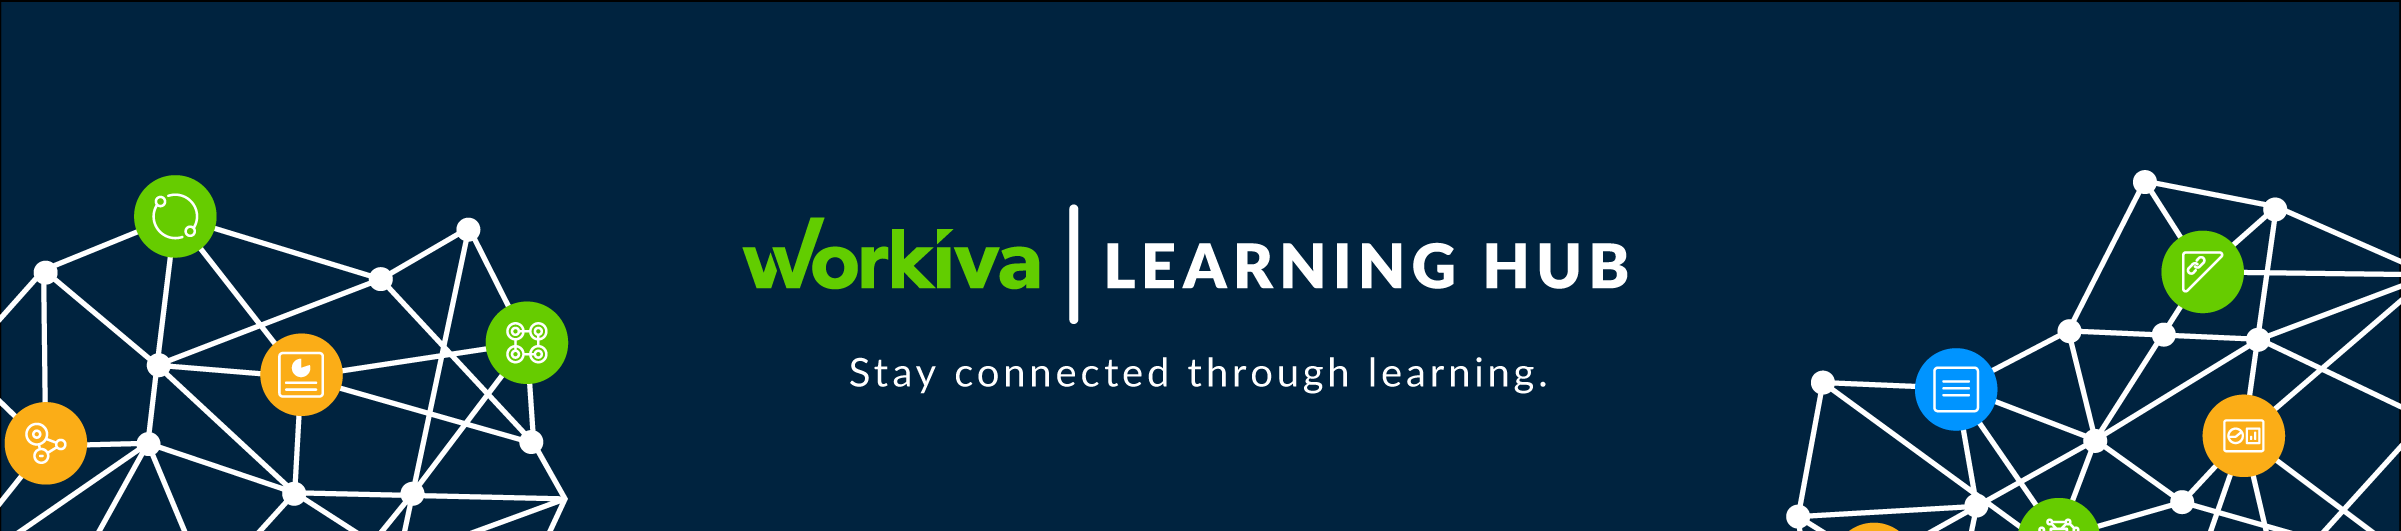 workiva-learning-hub-banner.png